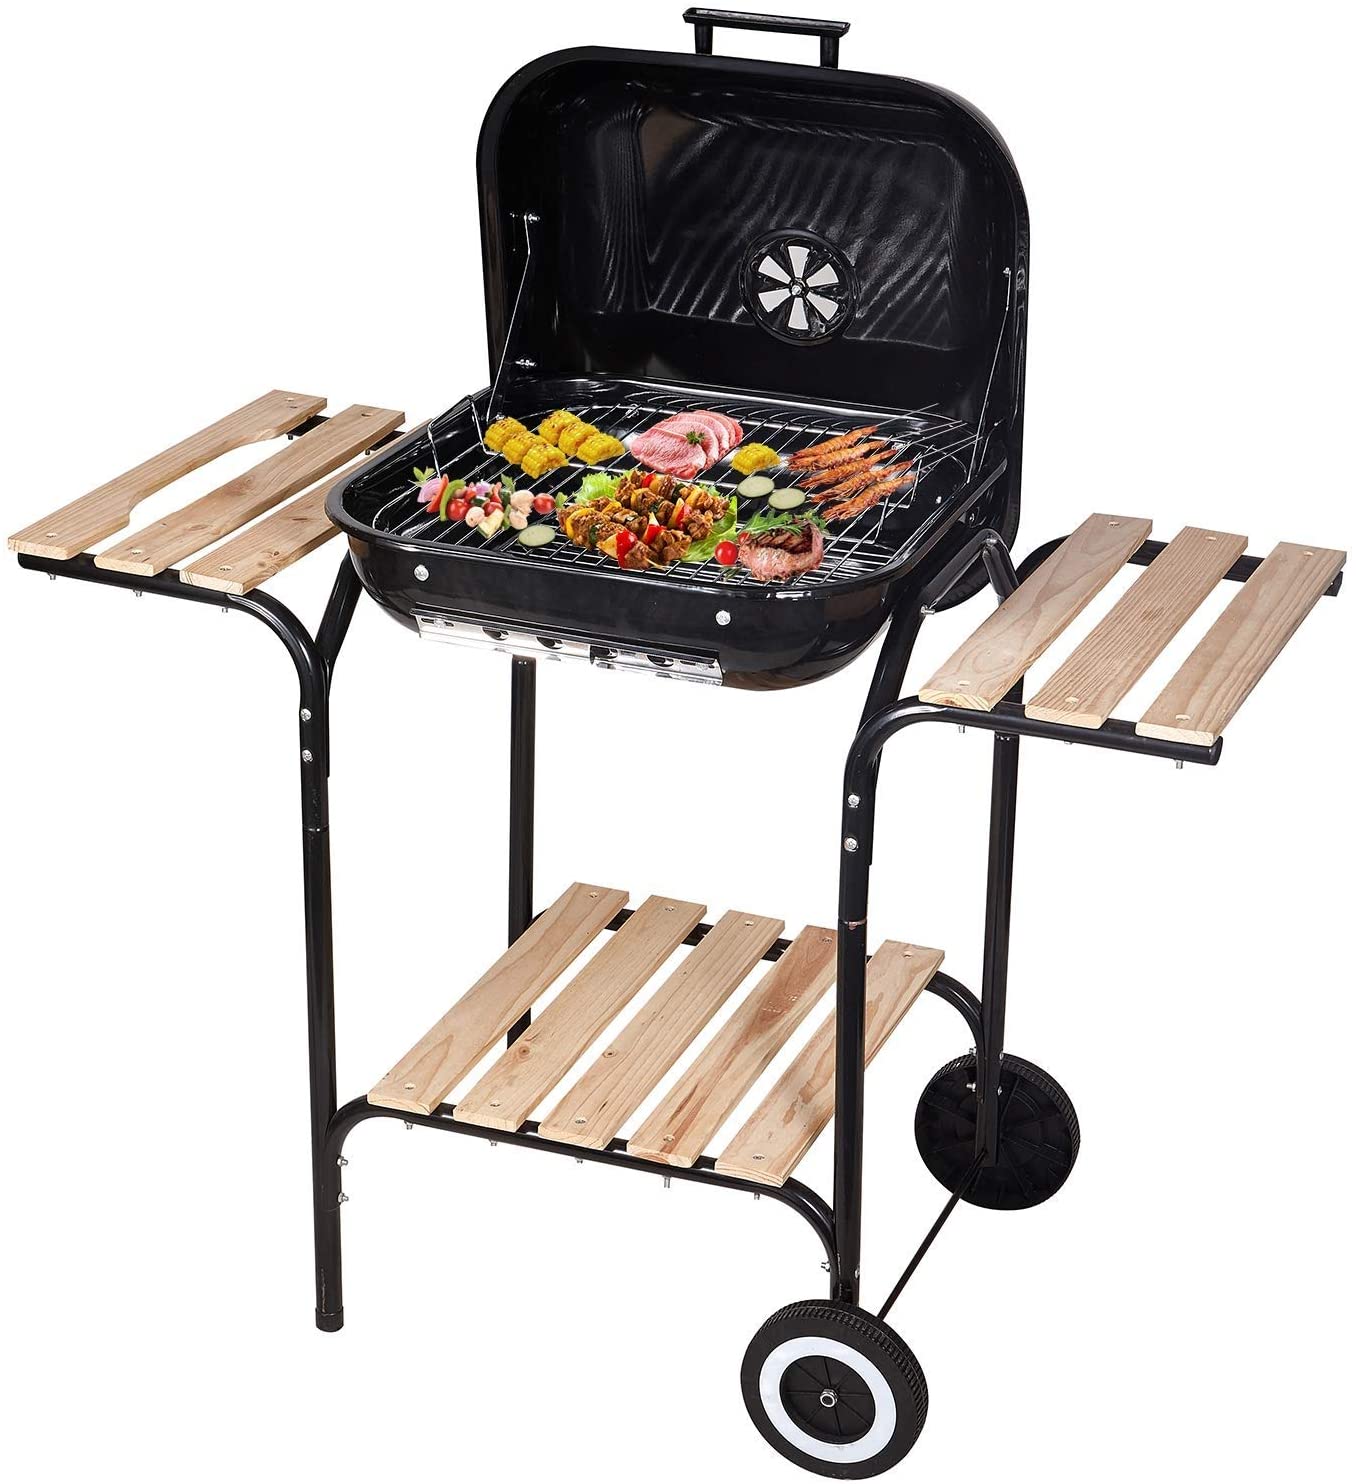 18" Multi Purpose Grill for Outdoor Camping, Garden, Family BBQ- Charcoal Grill